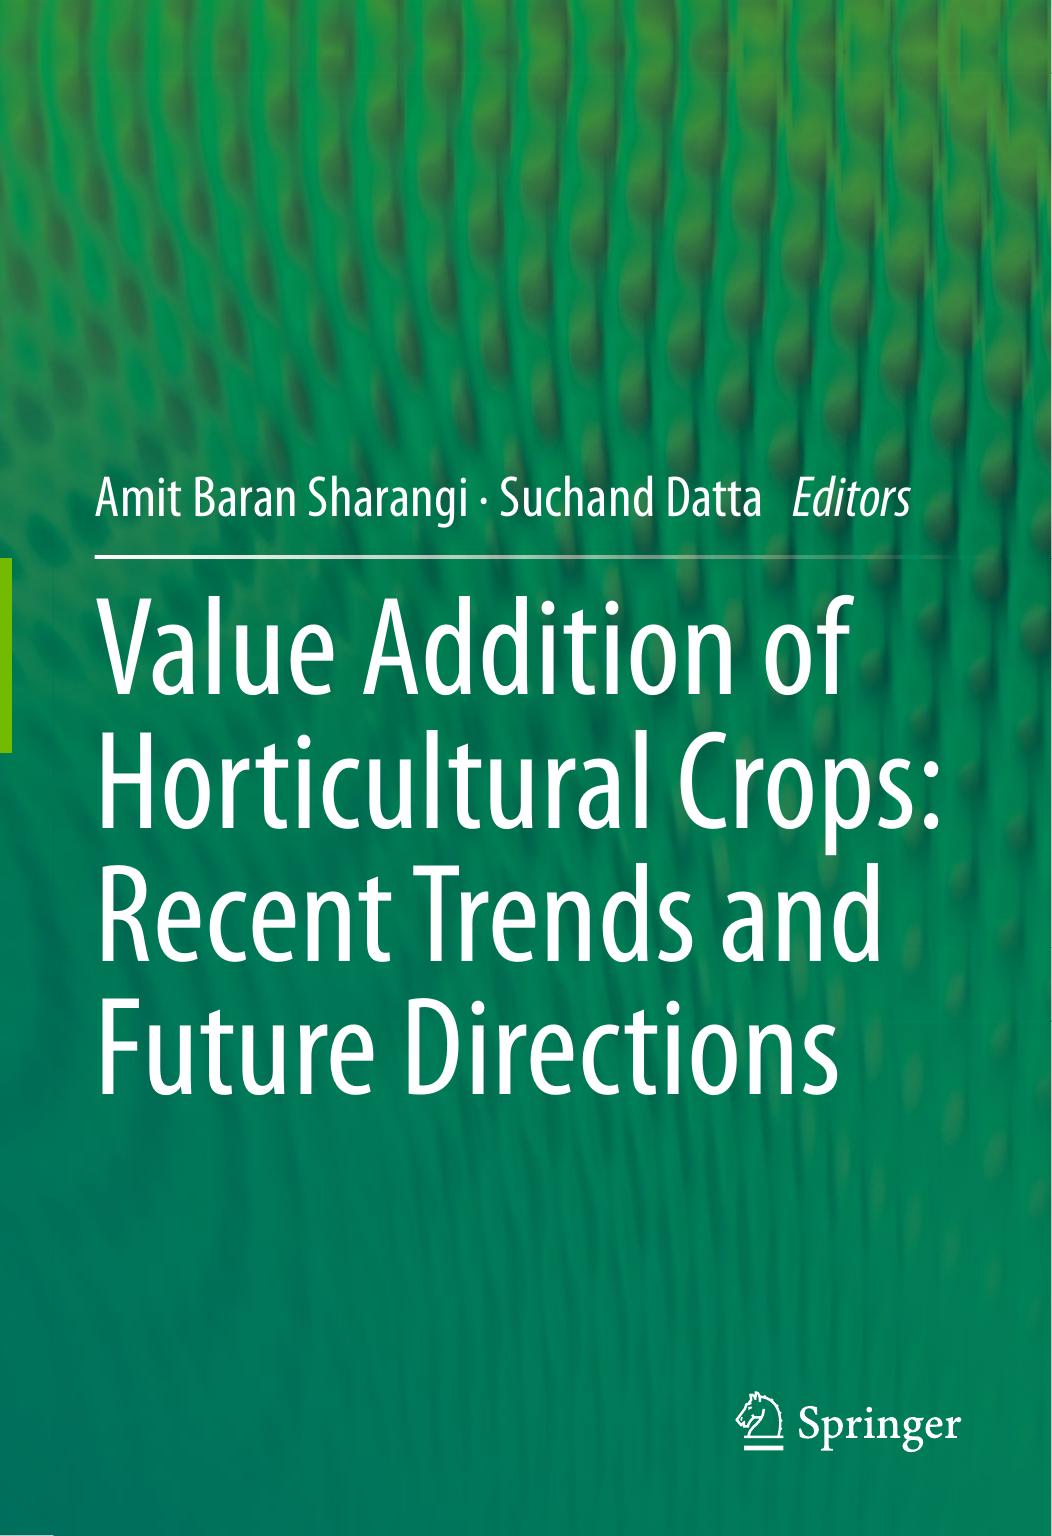 Value Addition of Horticultural Crops Recent Trends and Future Directions 2015